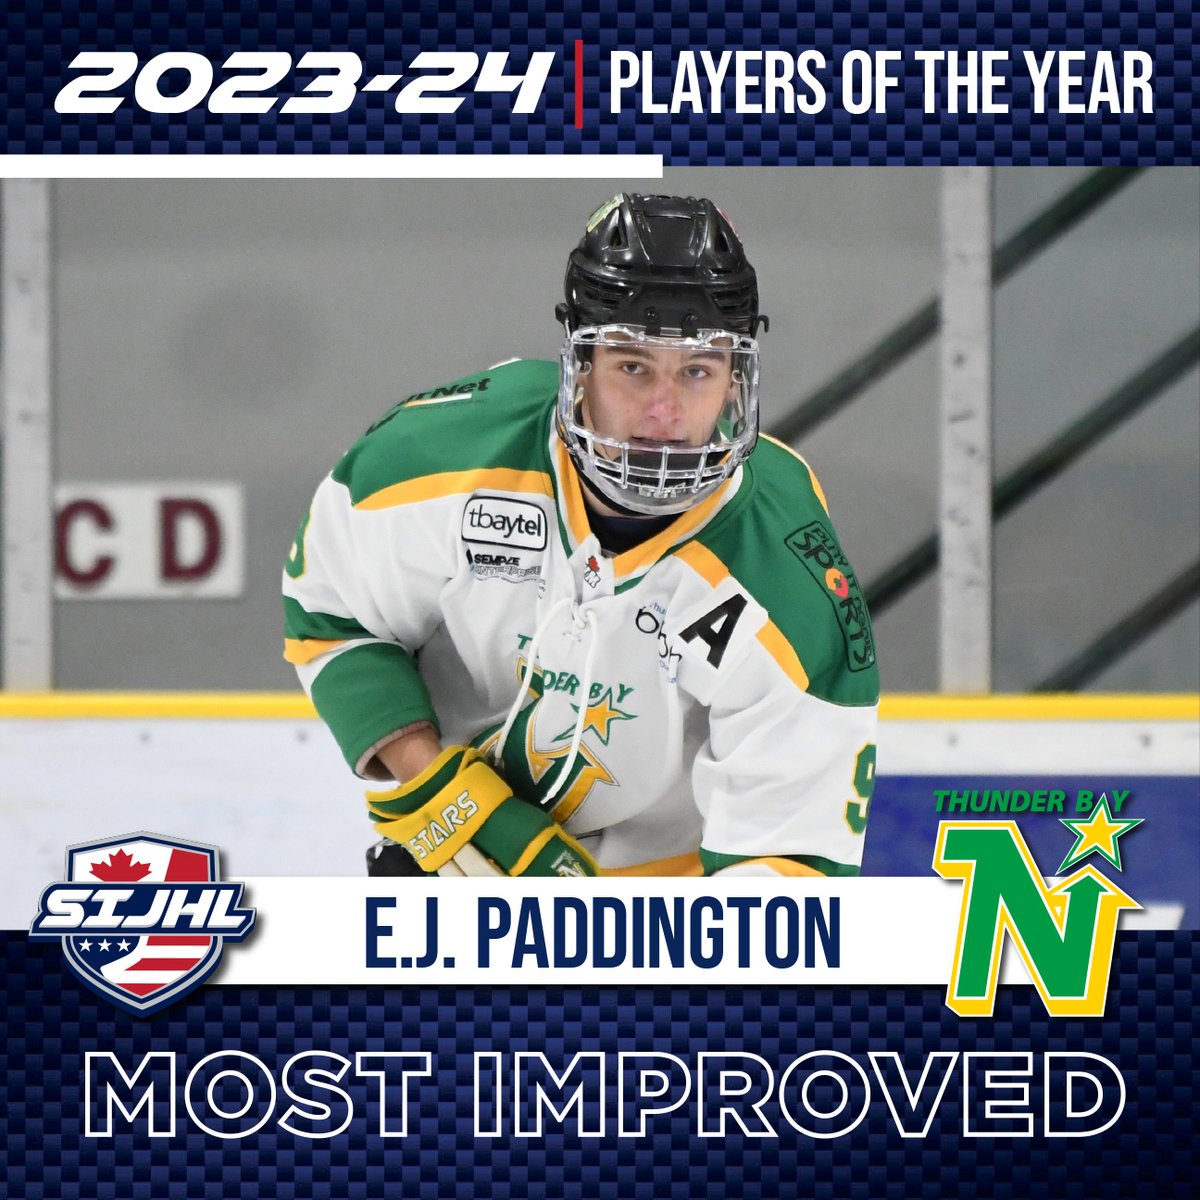 Congratulations to @TBNorthStars forward E.J. Paddington on being voted the SIJHL's Most Improved Player for the 2023-24 Season! sijhlhockey.com/sijhls-most-im…